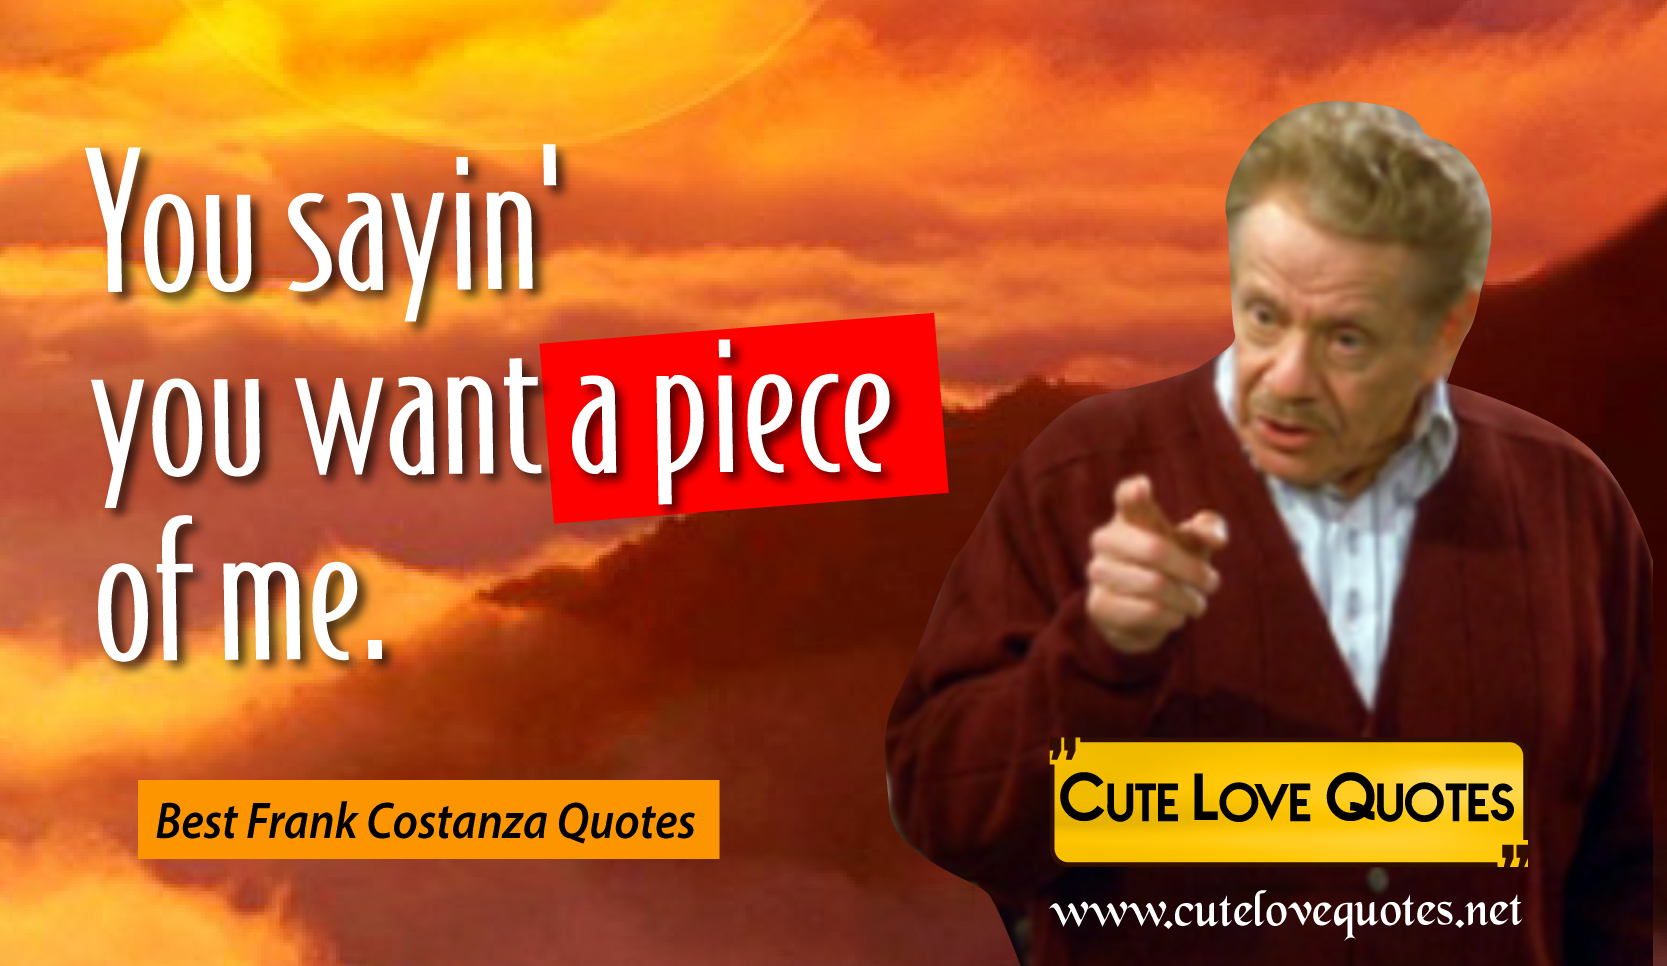 Frank Costanza Quotes